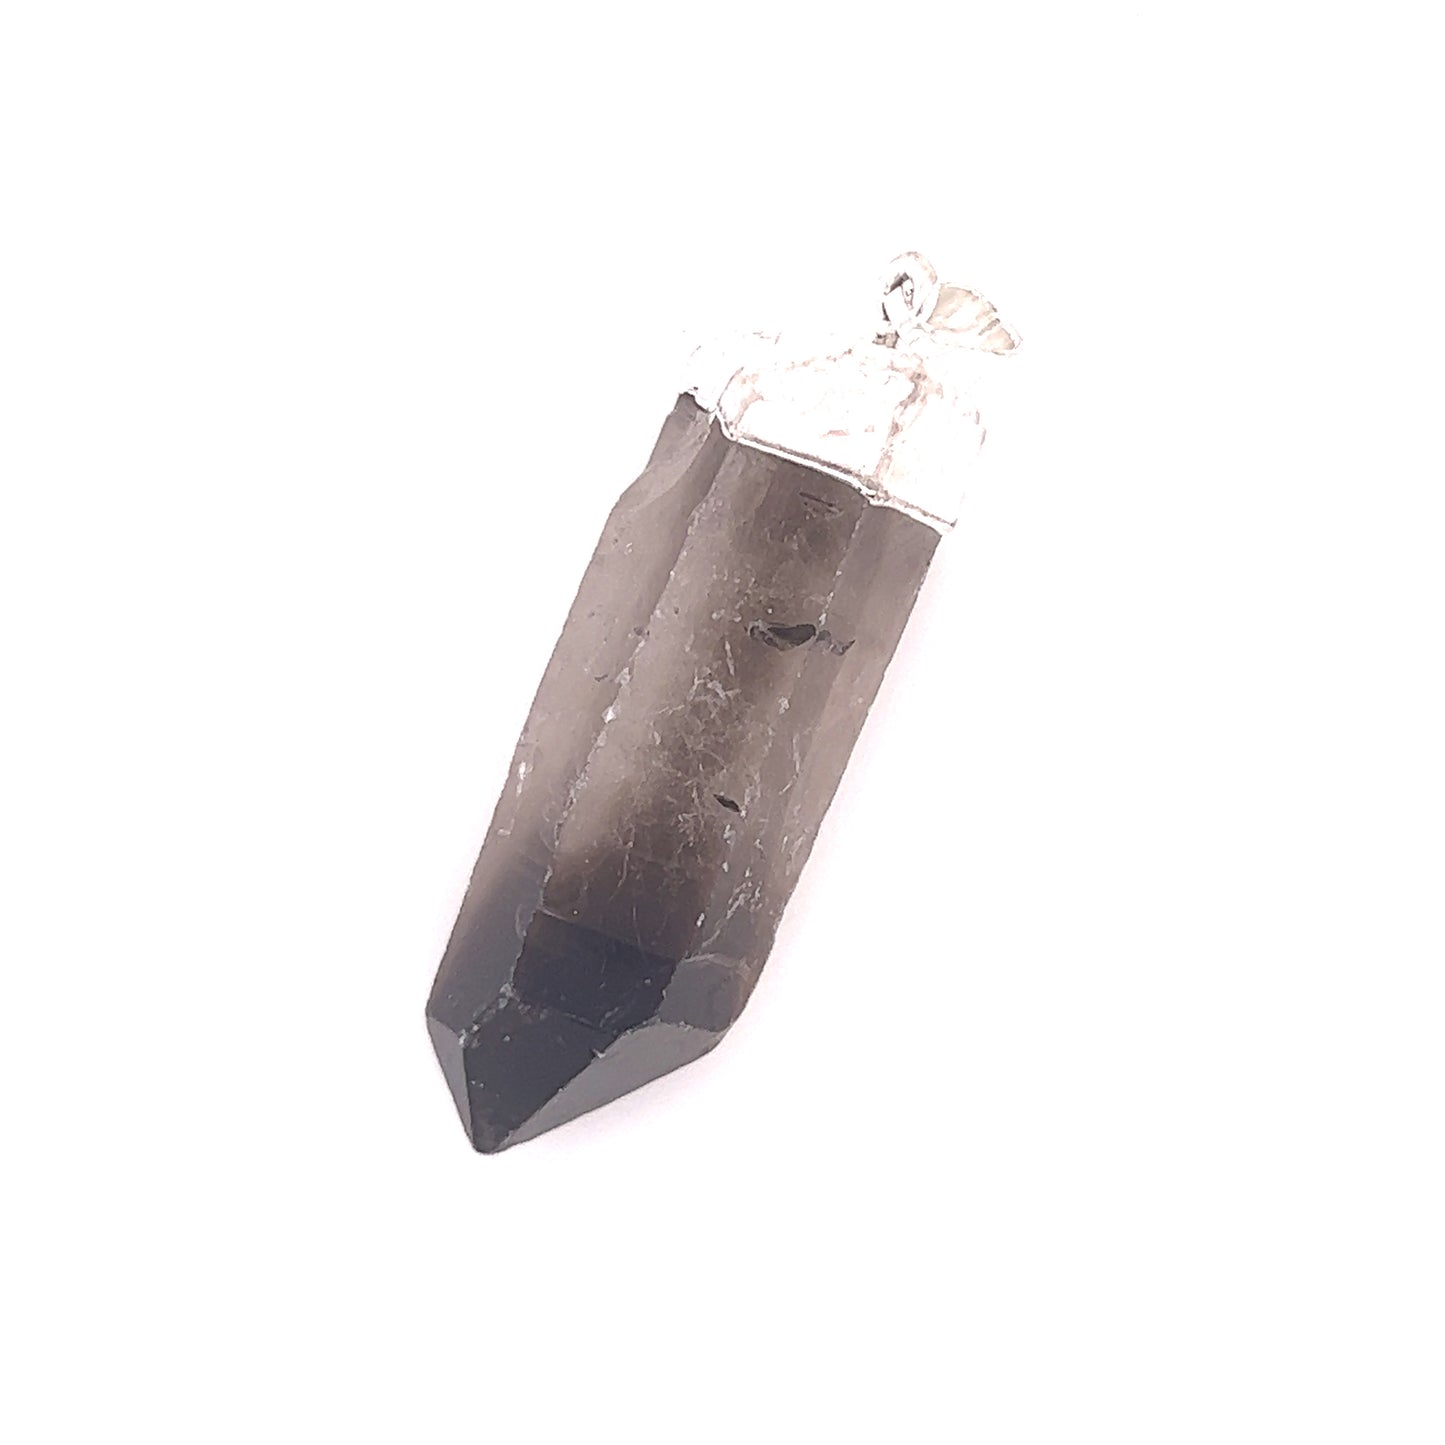 A Super Silver Raw Crystal Pendant With Silver Cap on a white background.